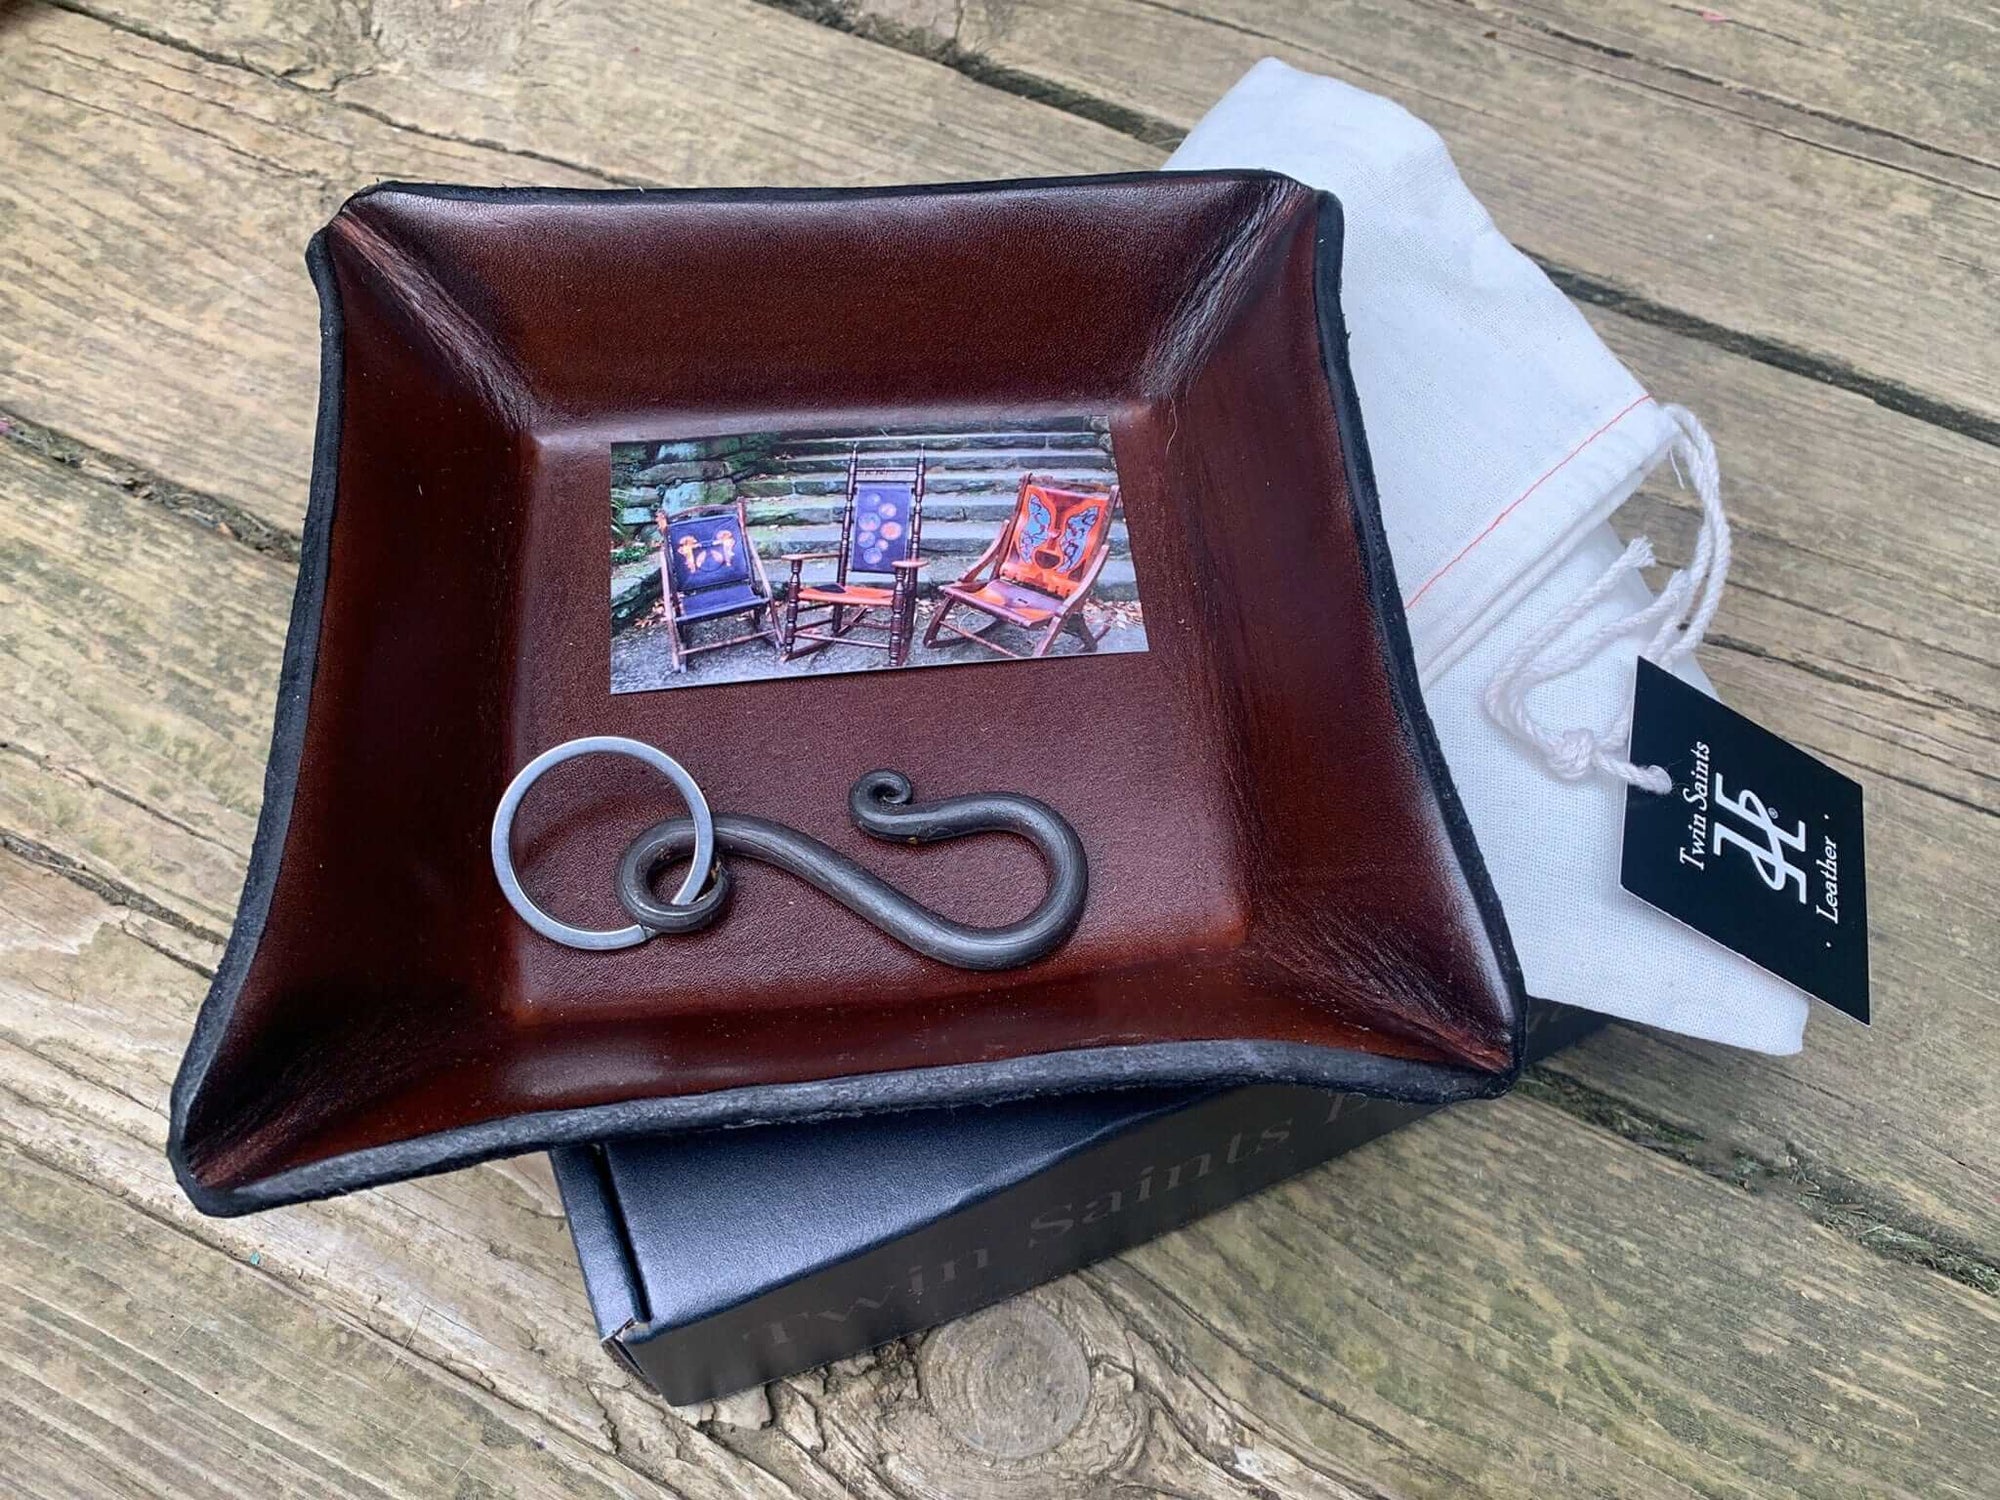 Boxed gift set with handcrafted leather valet and key chain